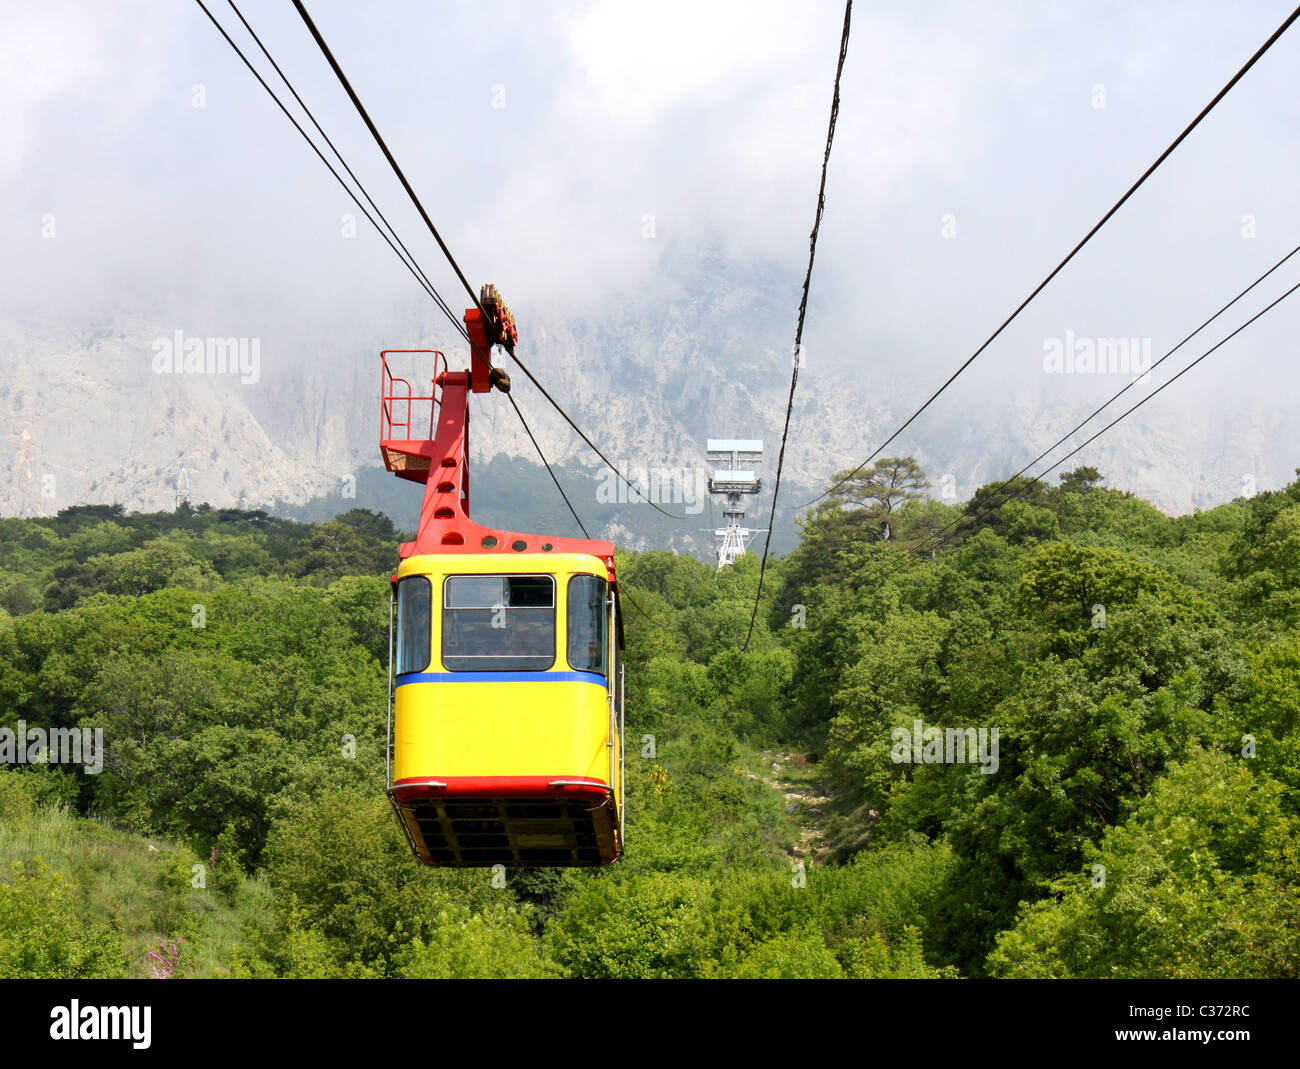 empty aerial ropeway cabin going from mountain Stock Photo